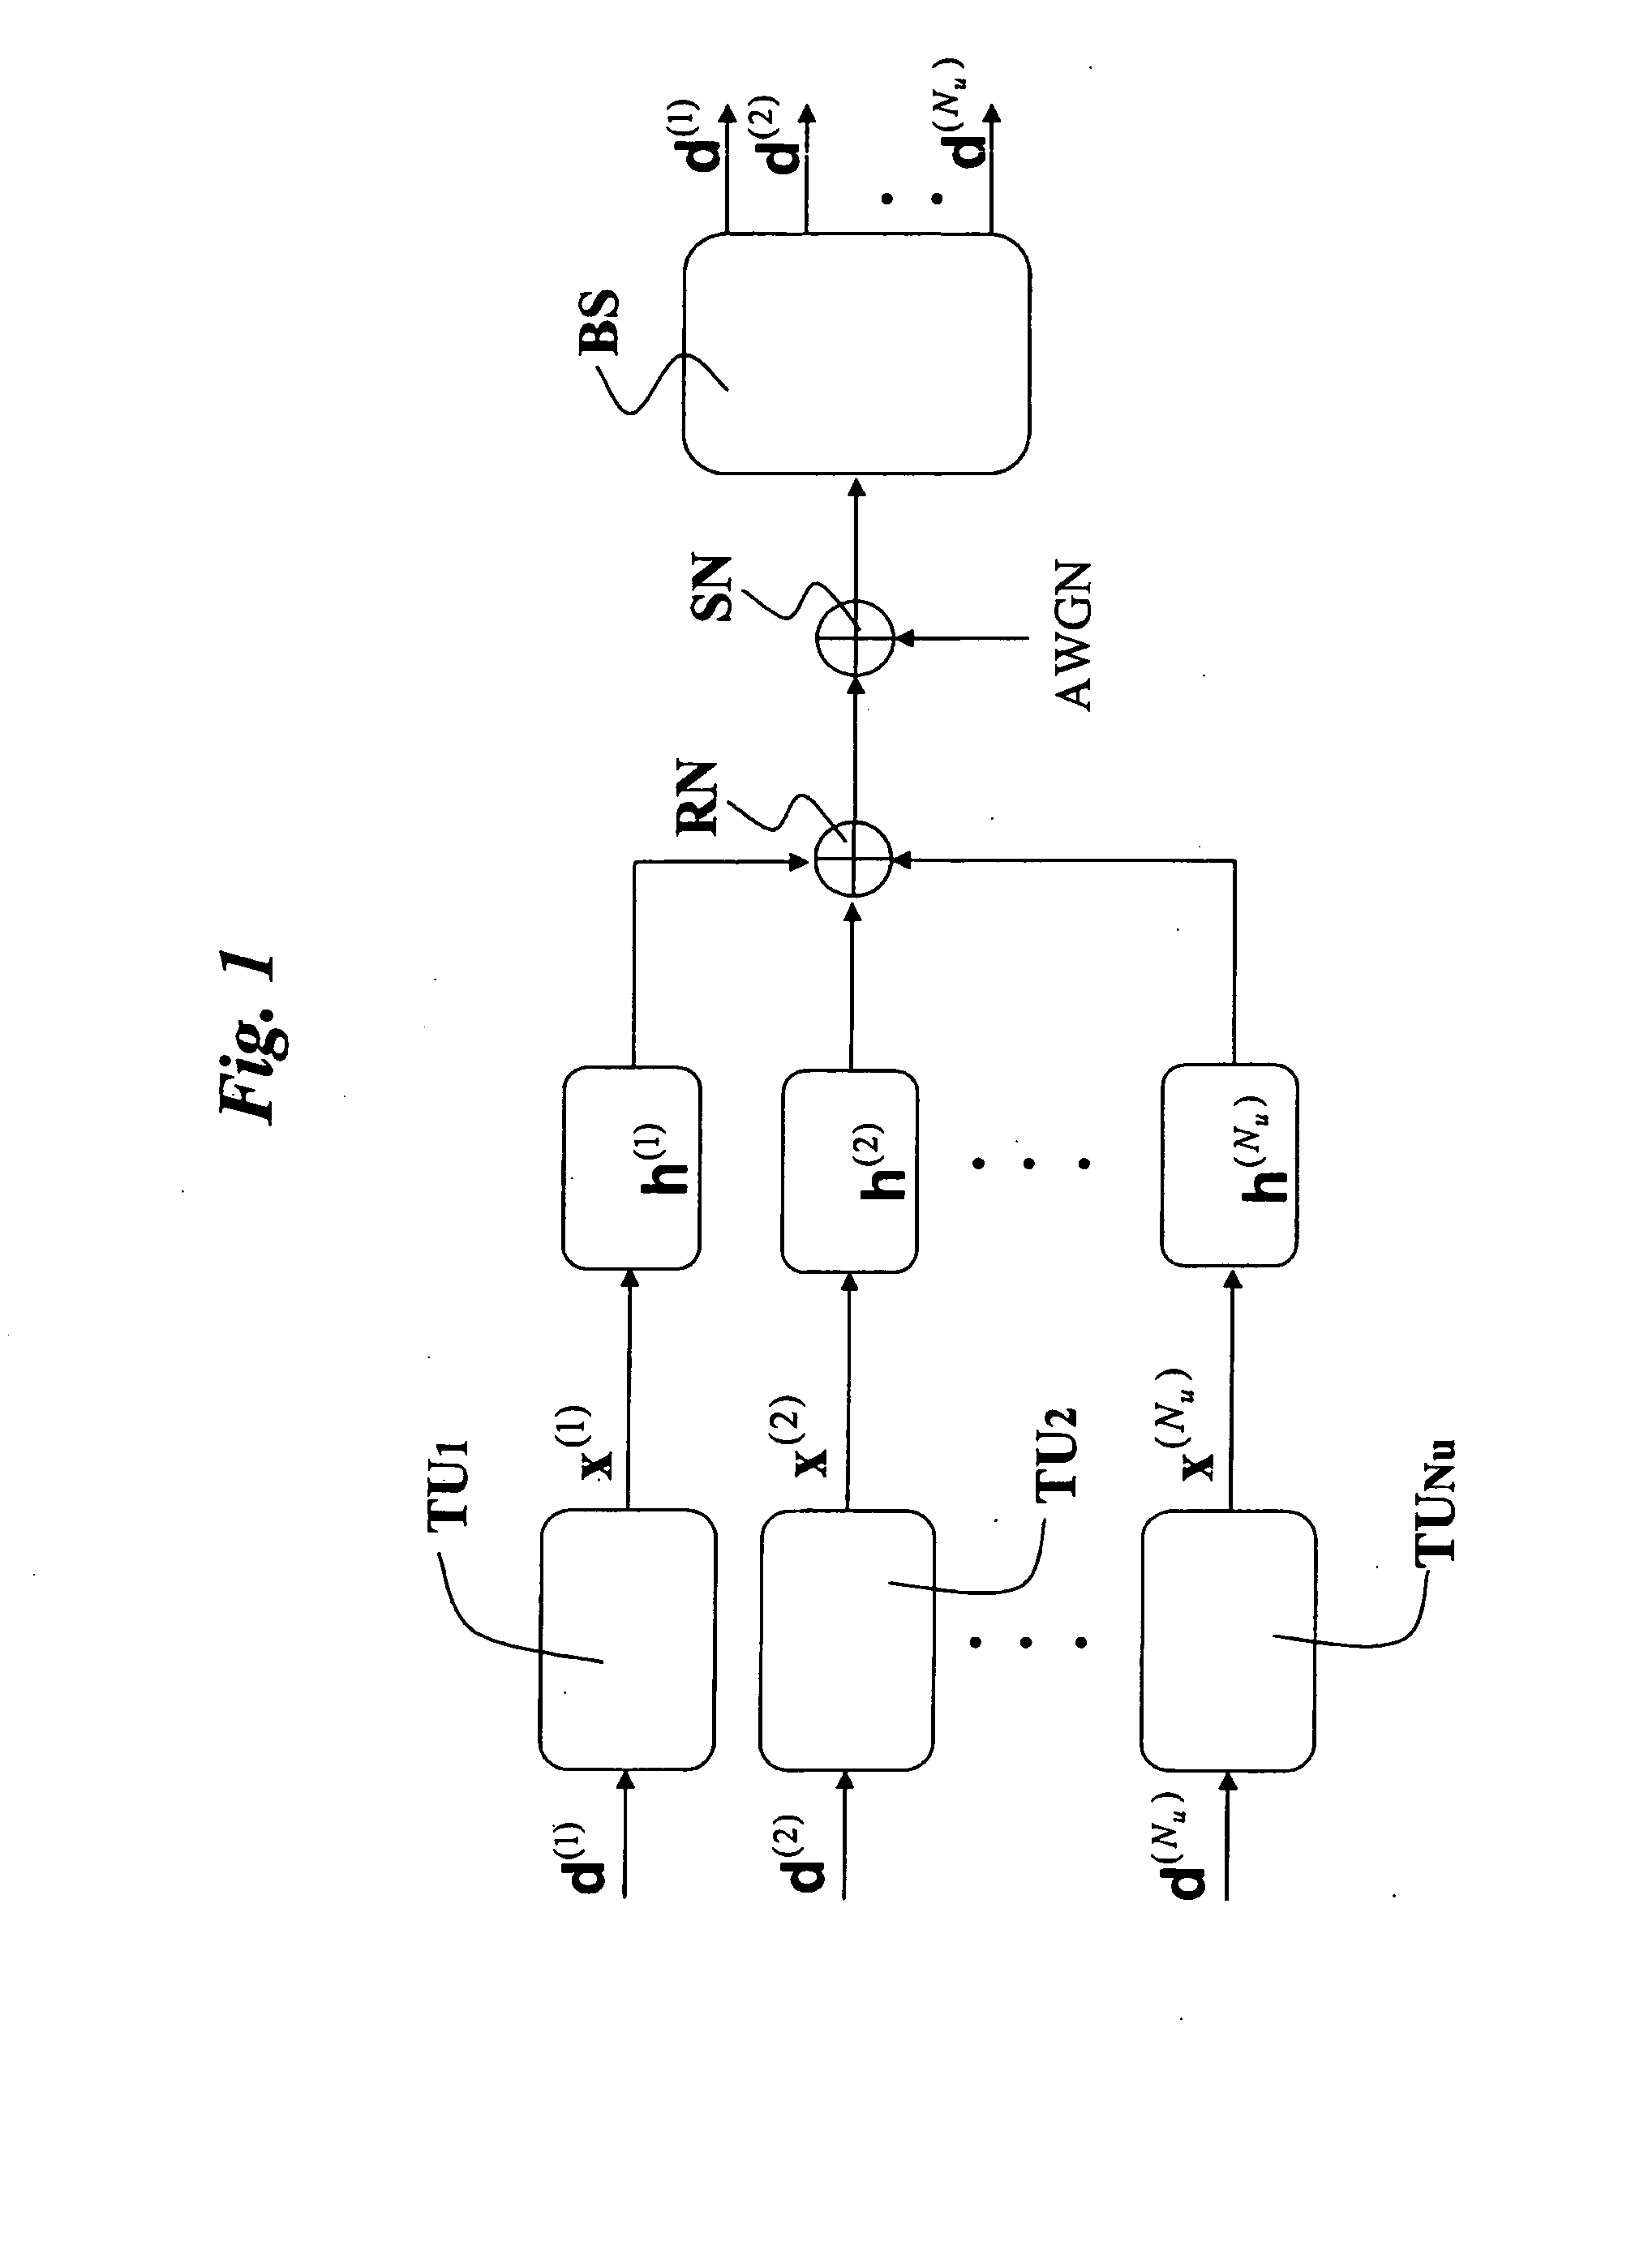 Frequency Domain Channel Estimation in a Single Carrier Frequency Division Multiple Acess System